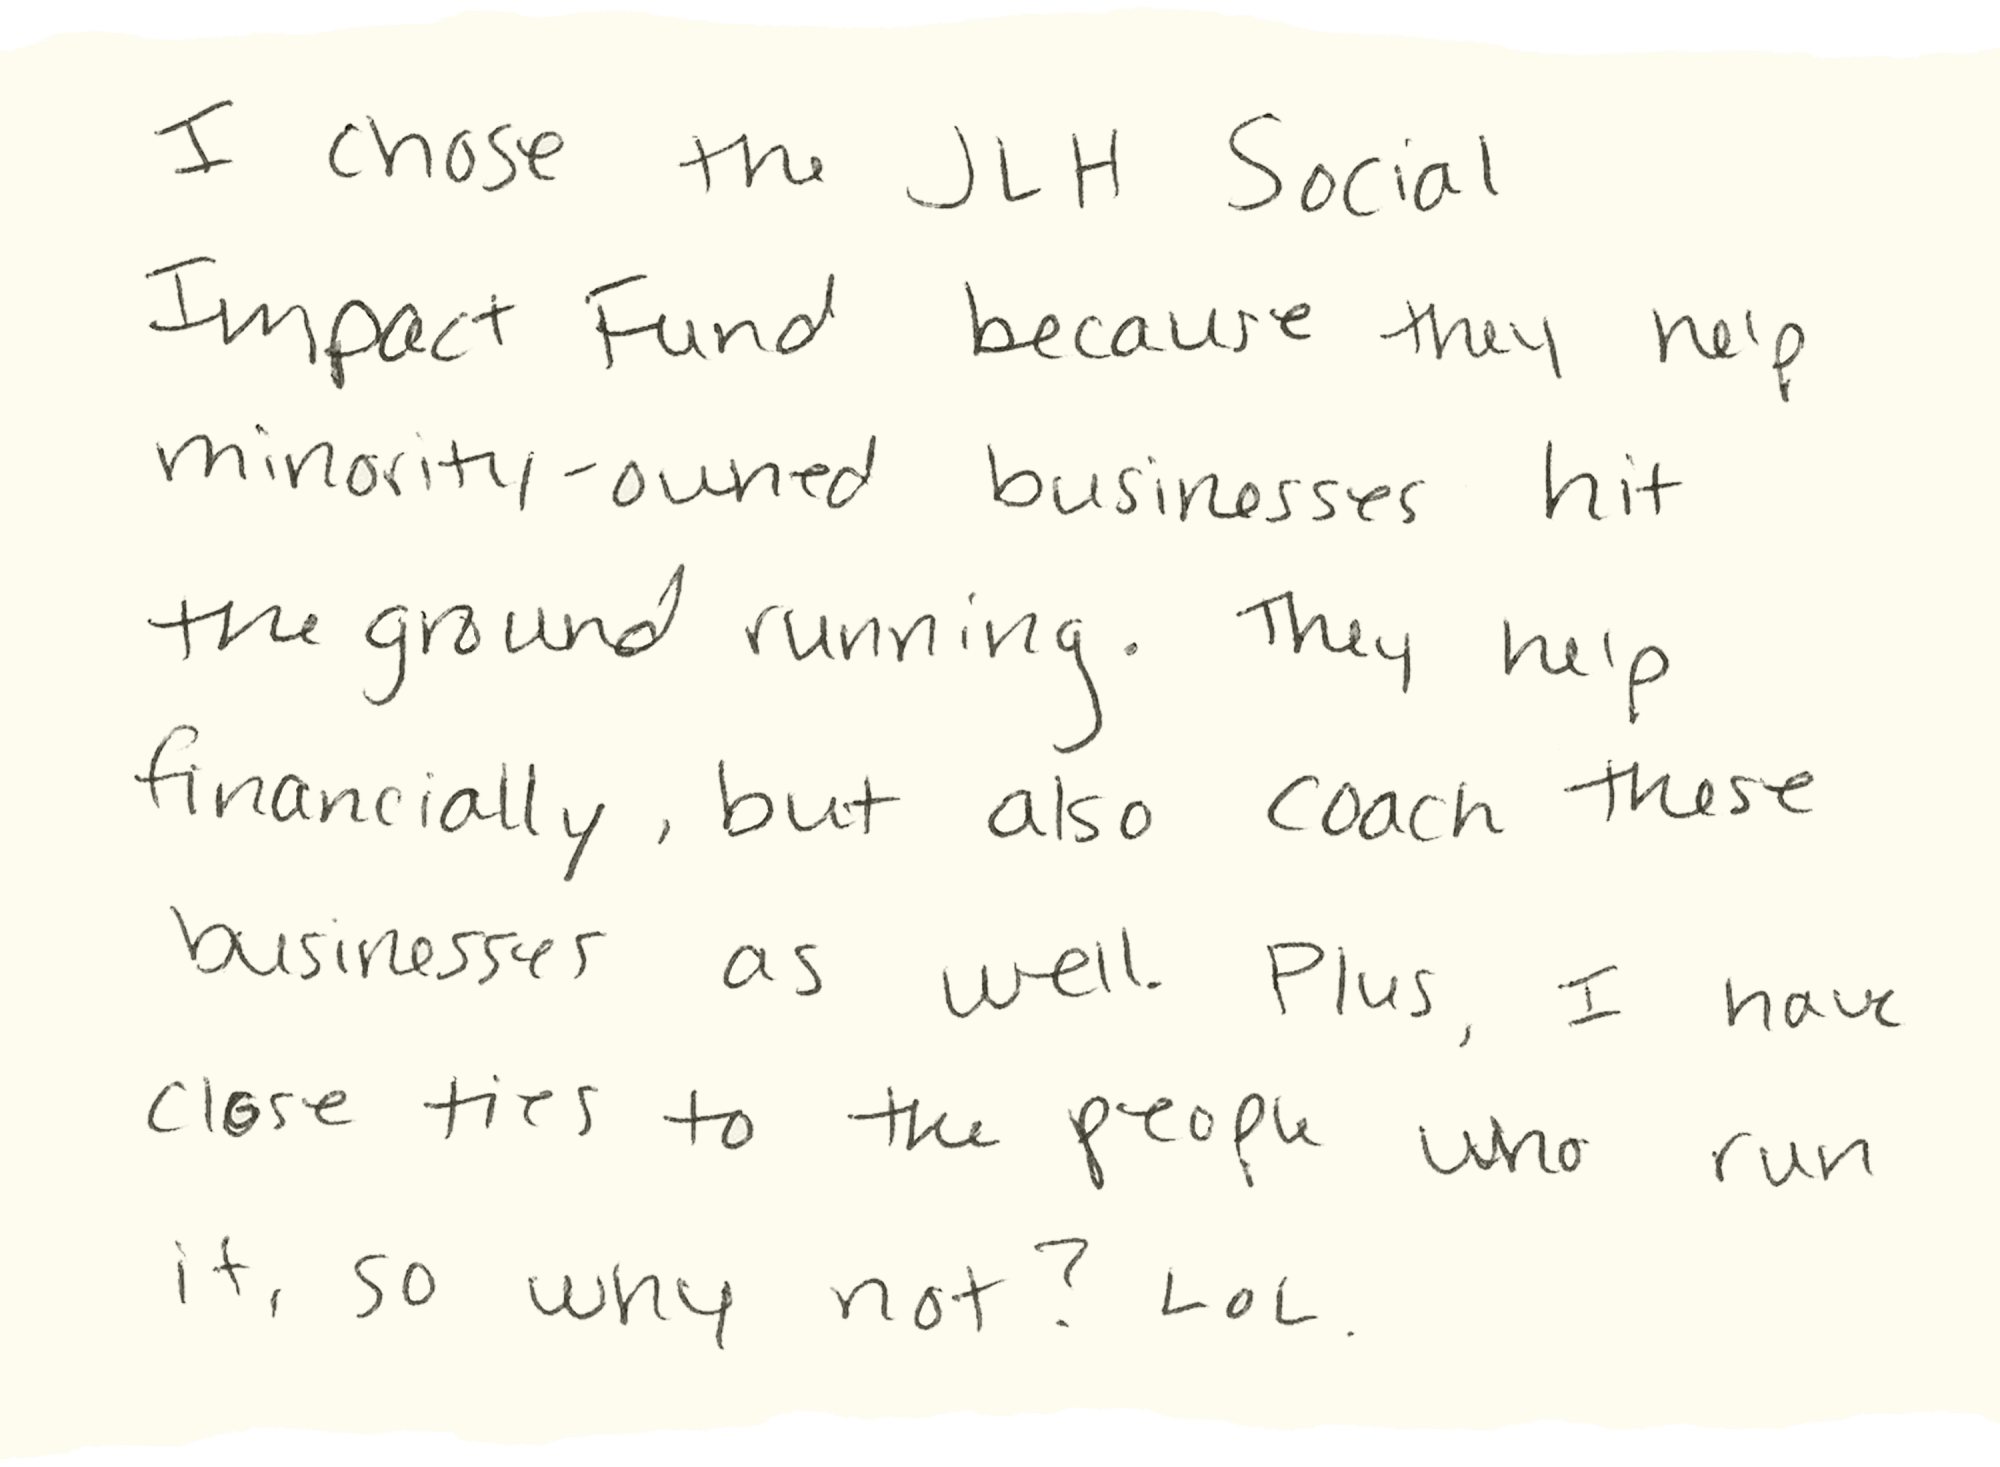 I chose the JLH Social Impact Fund because they help minority-owned businesses hit the ground running